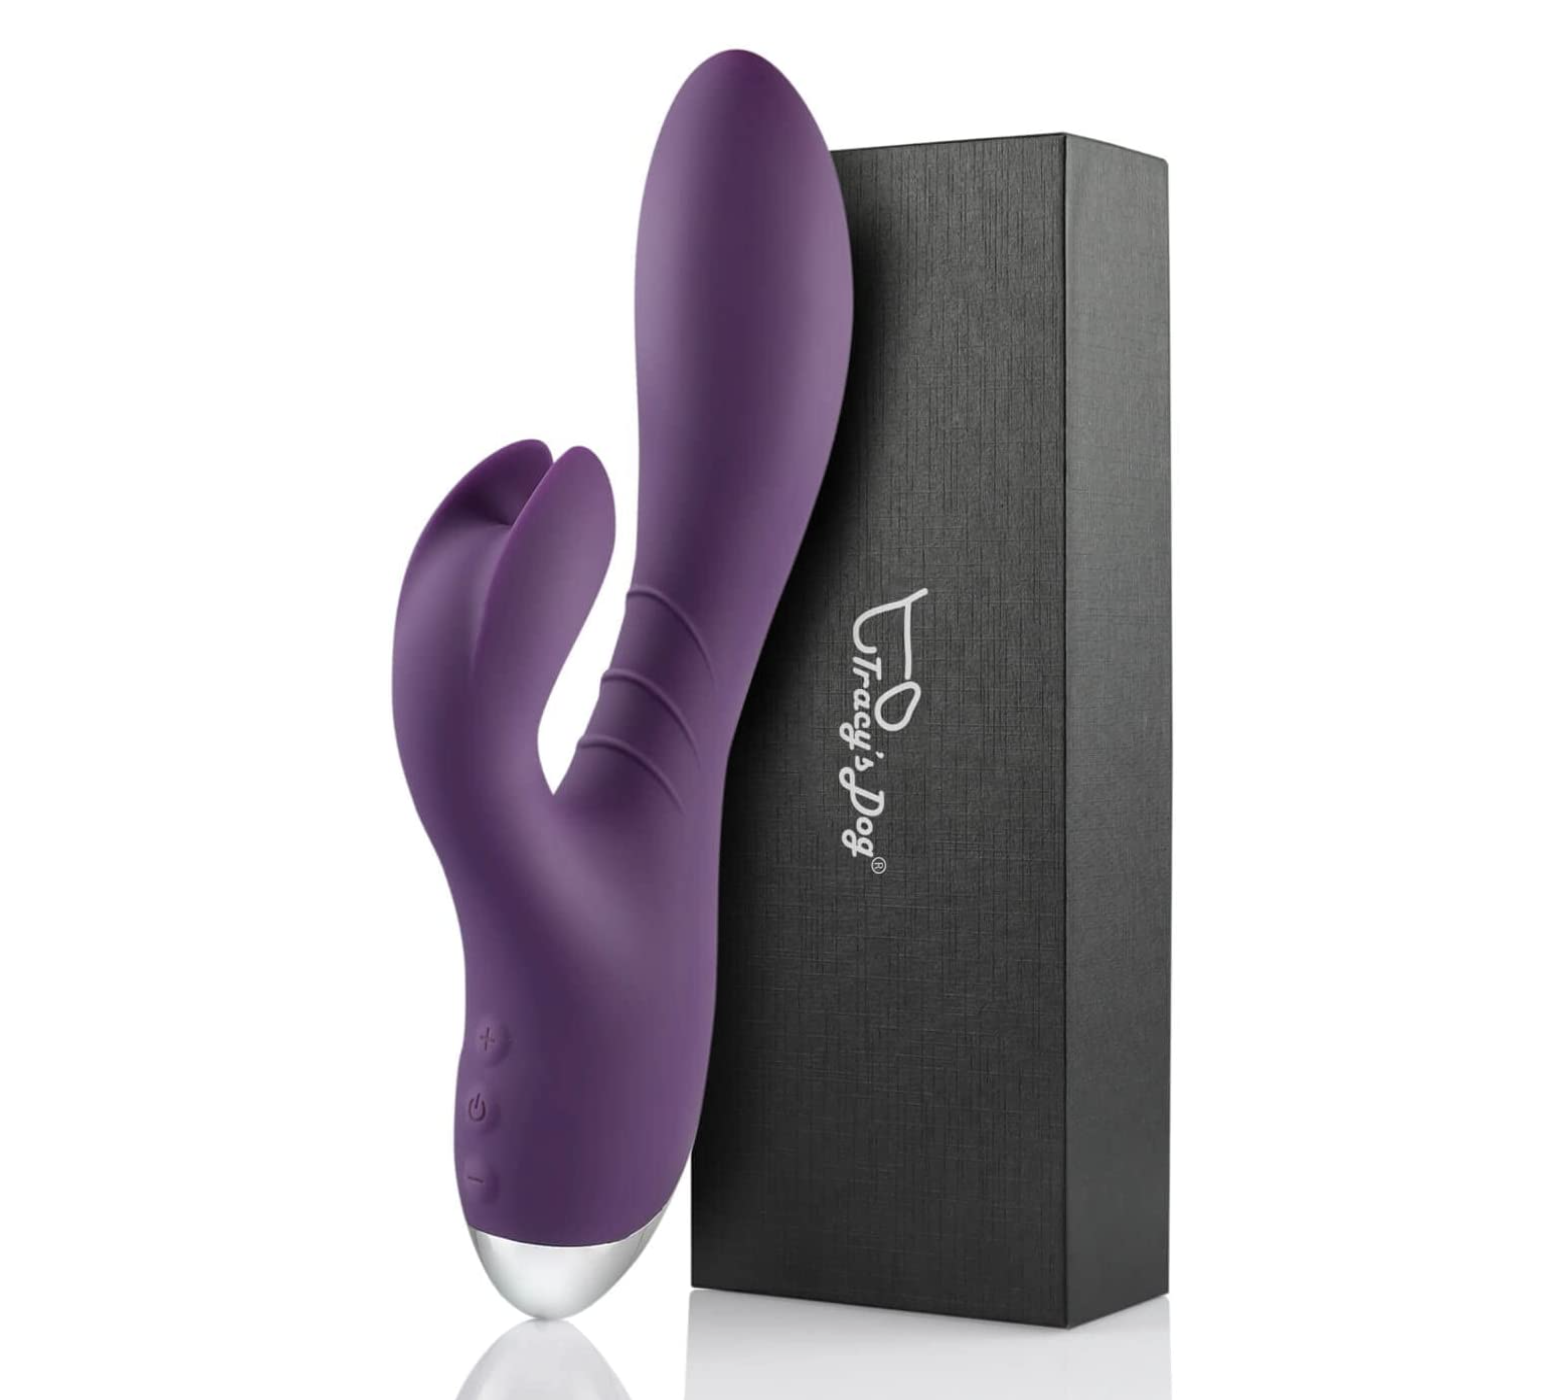 The vibrator leaning against its box